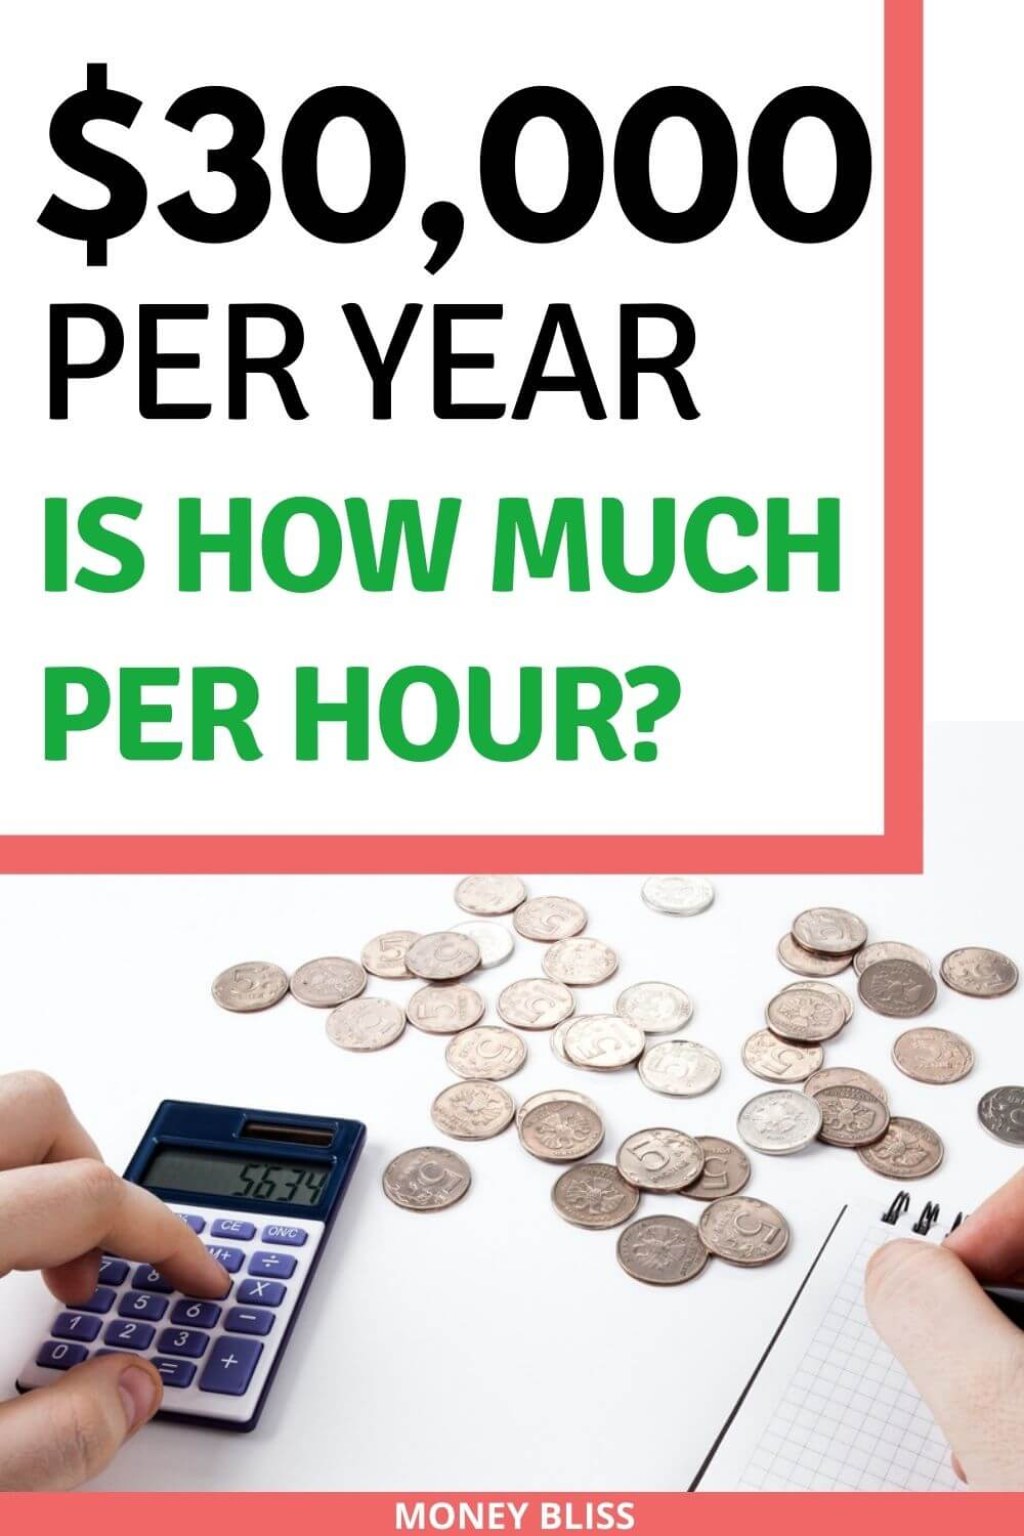 budgeting 30k per year - $ a Year is How Much an Hour? Good Salary or No? - Money Bliss